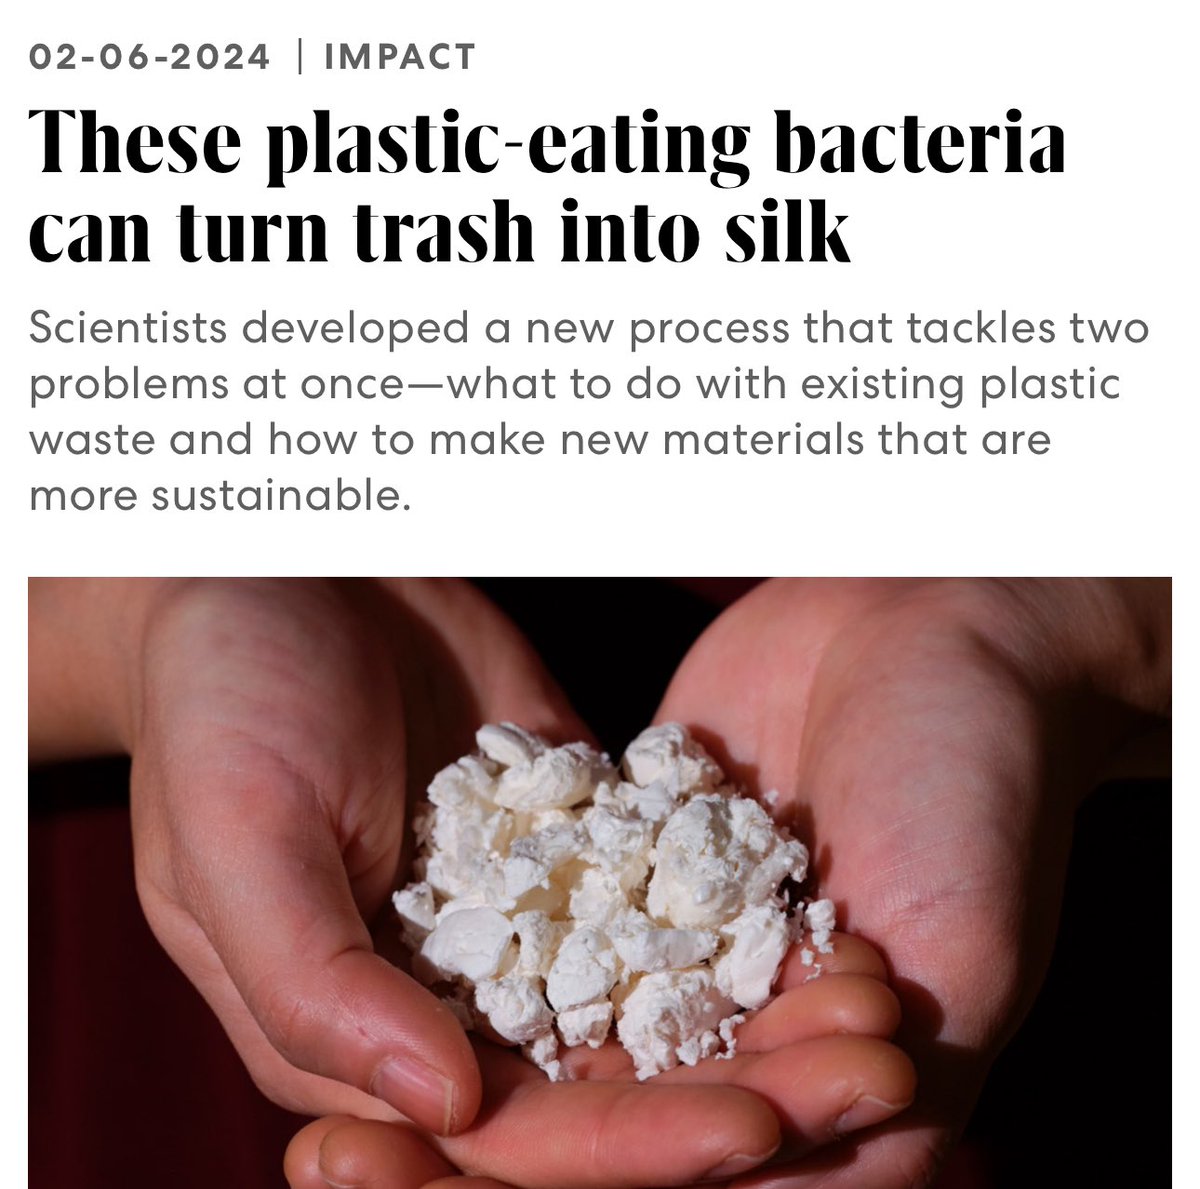 Biologists literally turned plastic into silk and you’re worried about the future